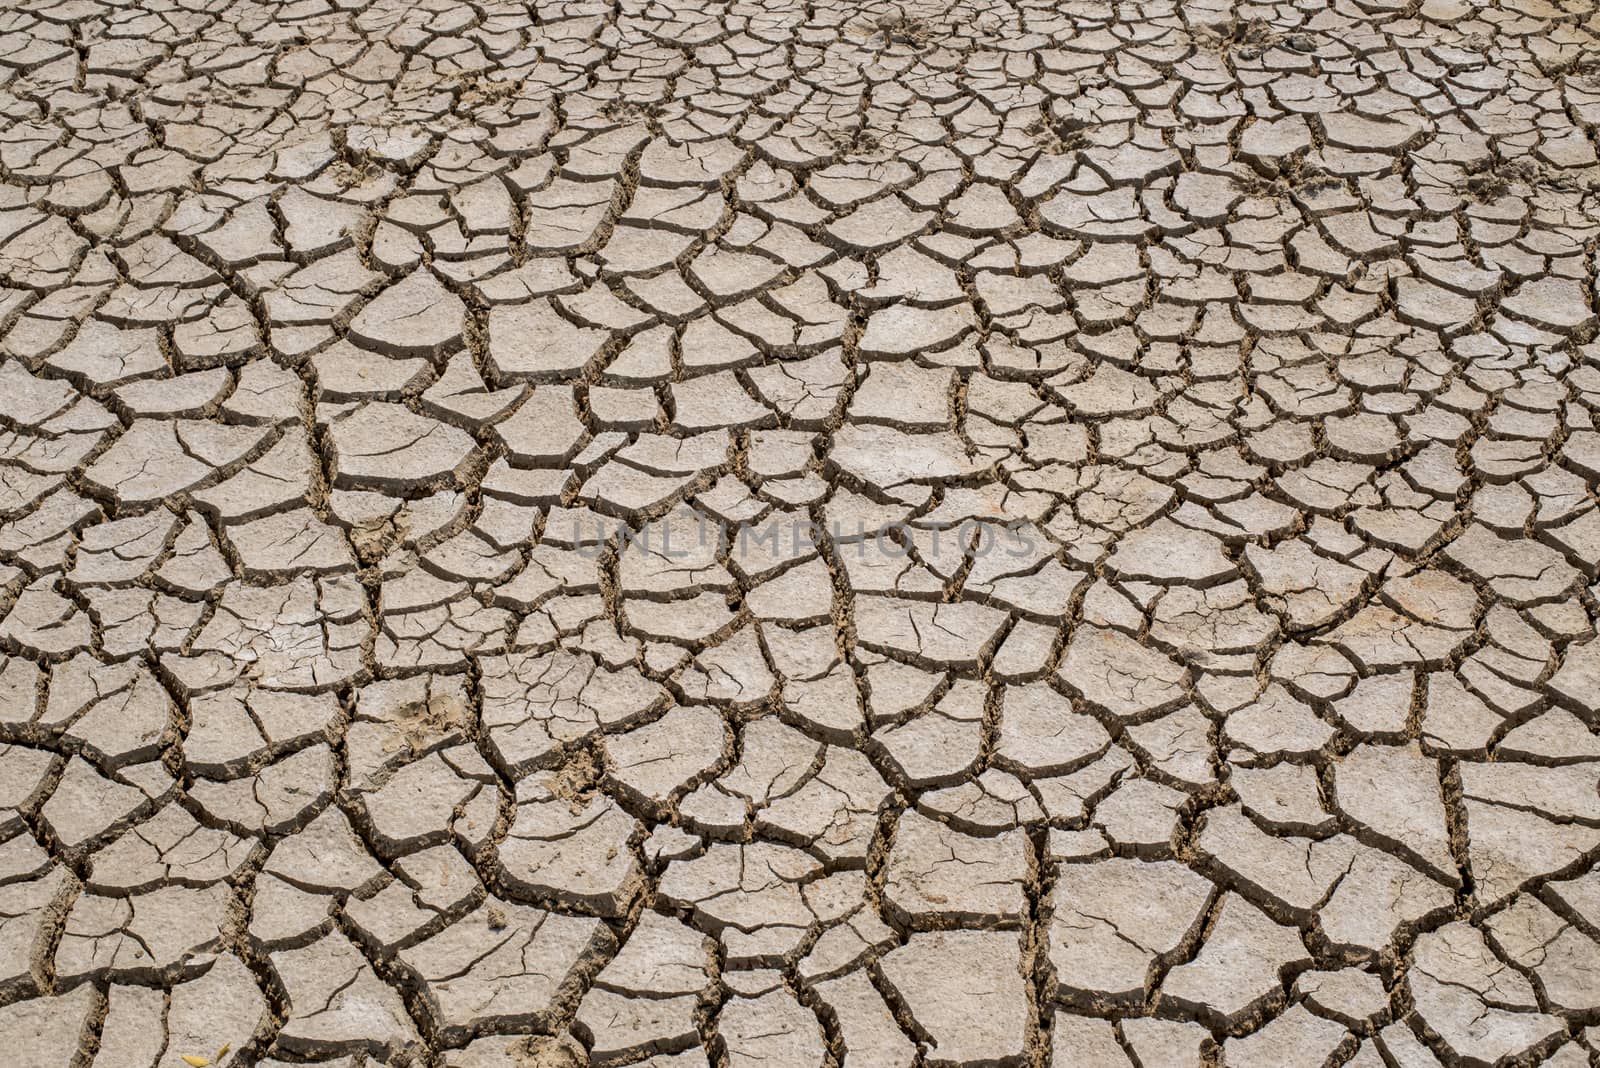 Crack soil on dry season, Global warming / cracked dried mud / D by chanwity